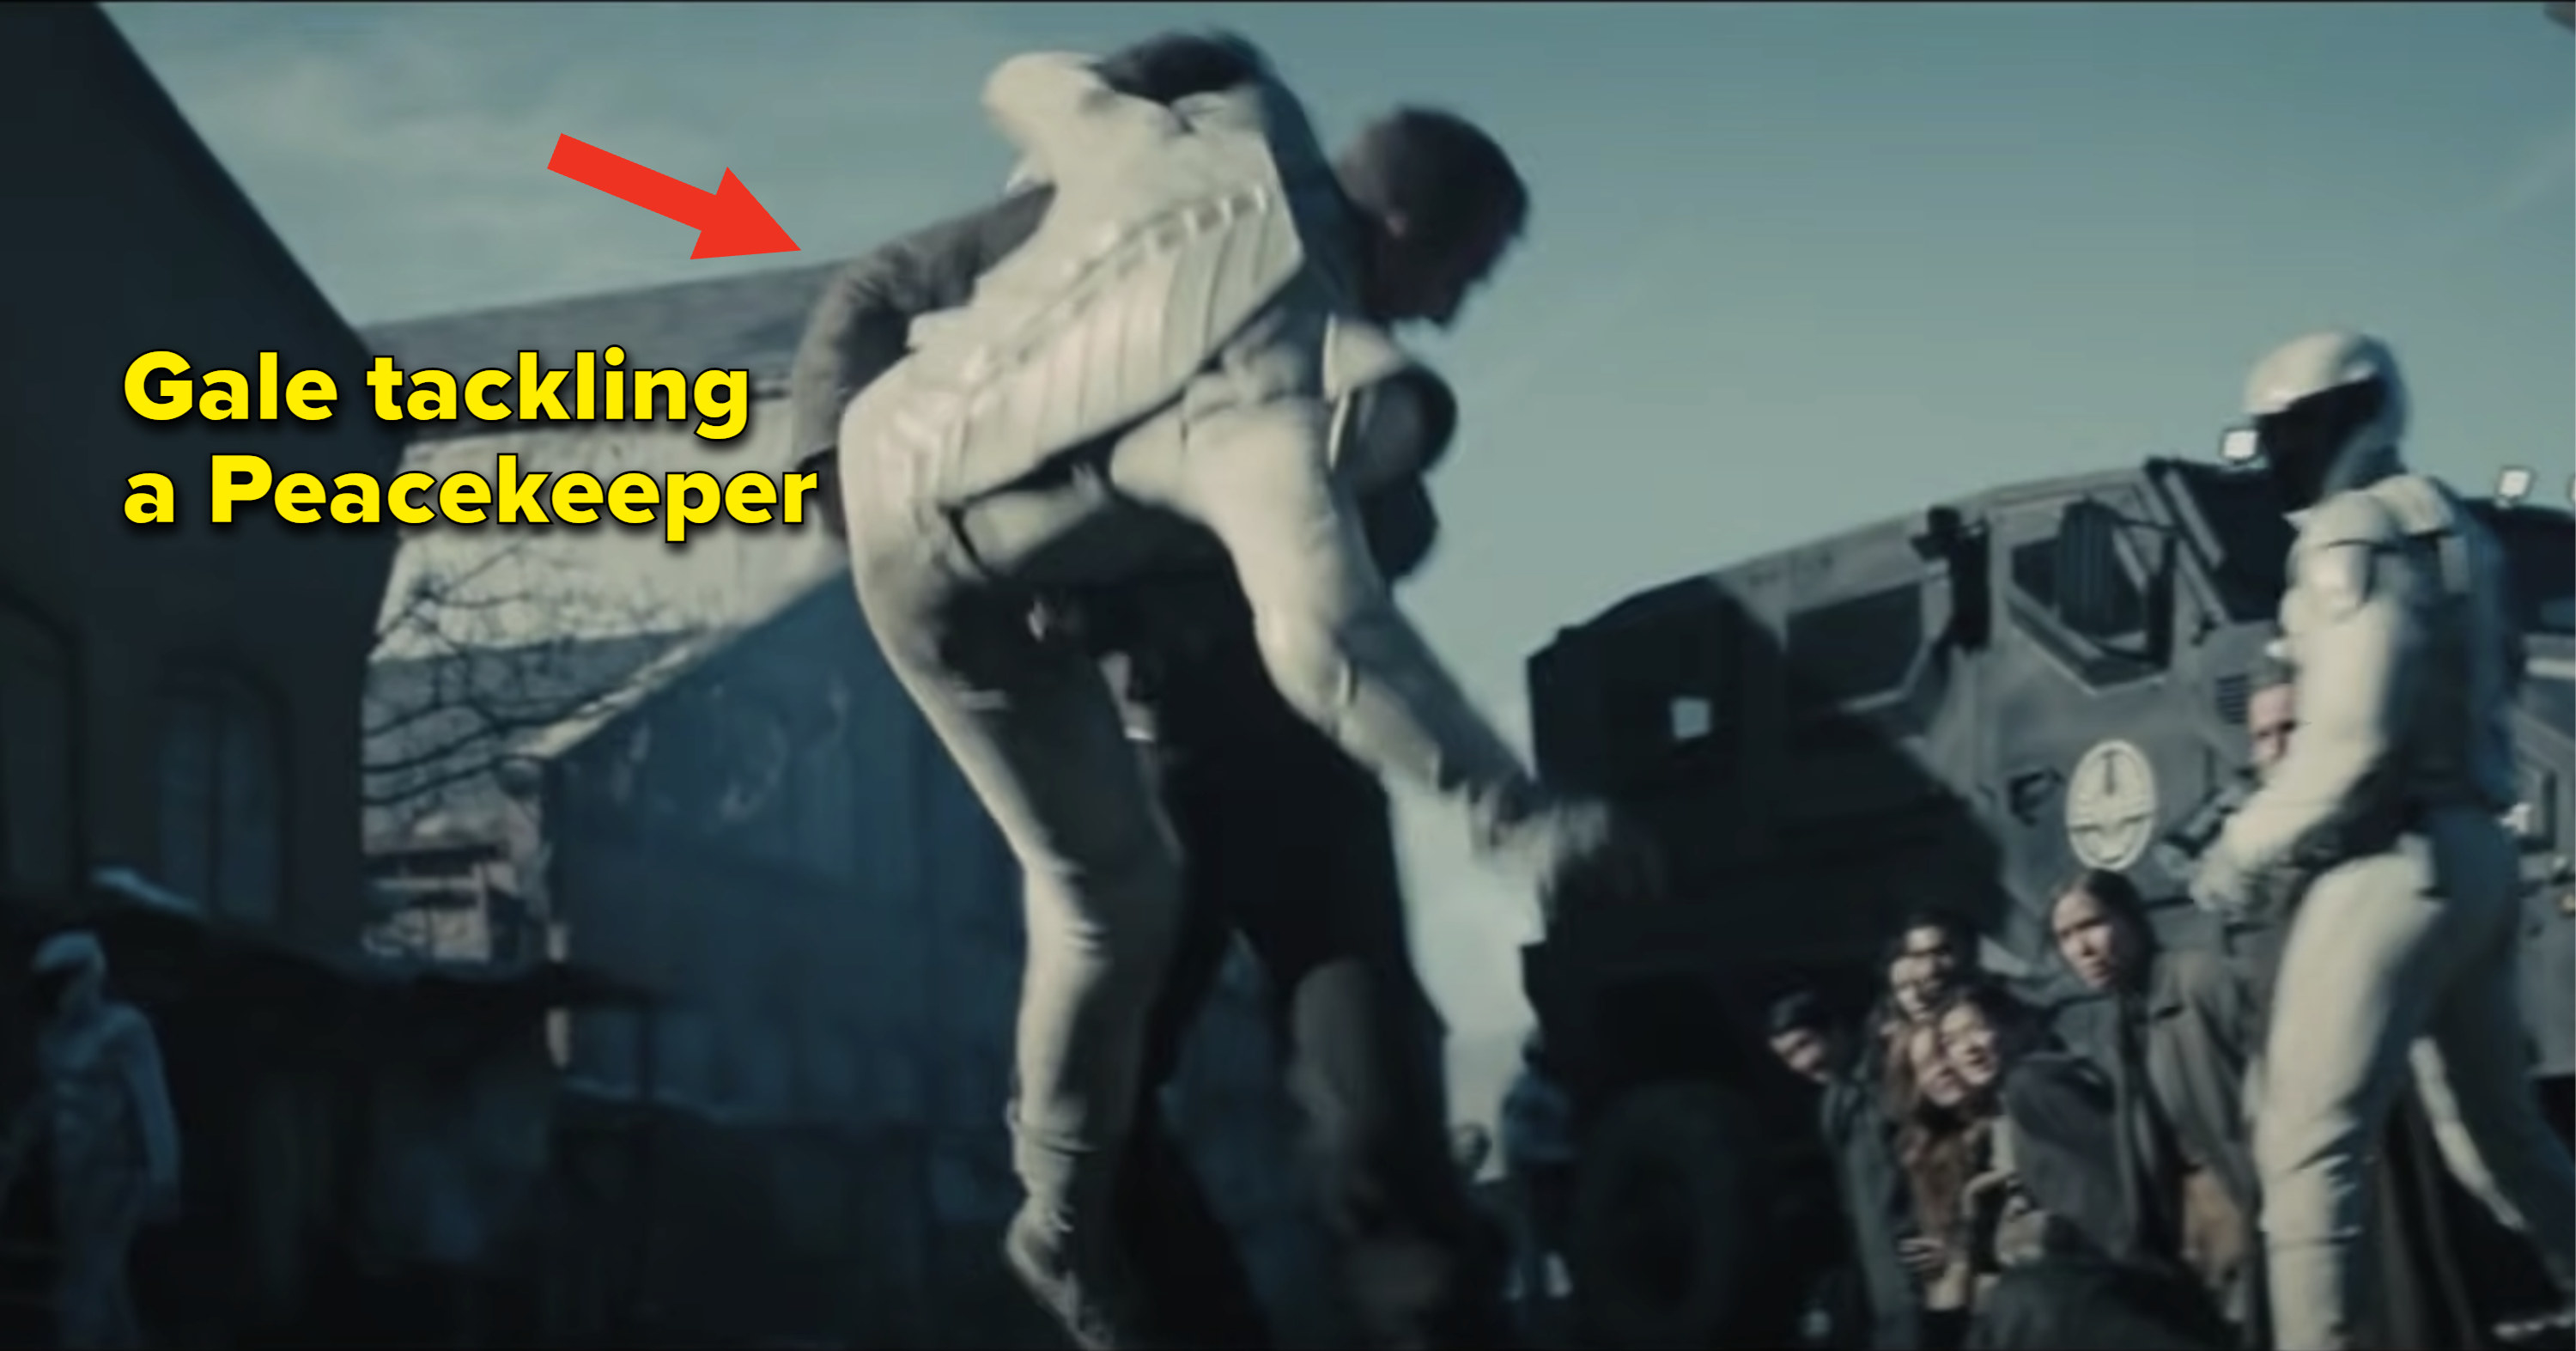 Gale from &quot;The Hunger Games: Catching Fire&quot; tackling a guard with the caption &quot;Gale tackling a Peacekeeper&quot;